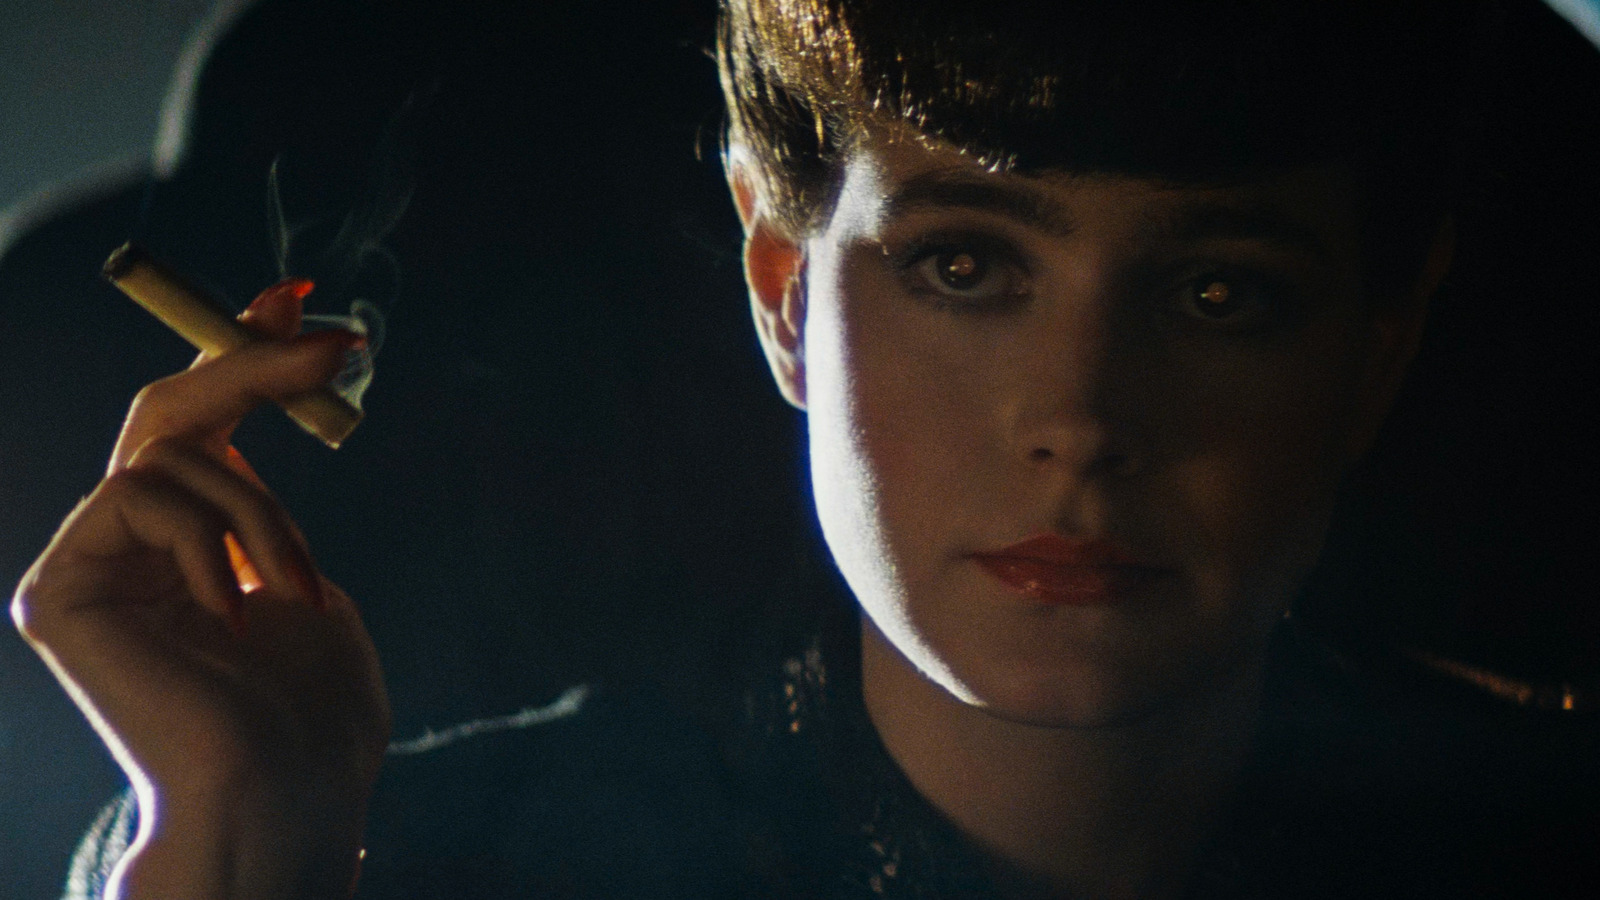 Tapetum Lucidum is a layer of tissue in the eye that reflects visible light. They used a cool practical effect in Blade Runner to capture this without any CGI.